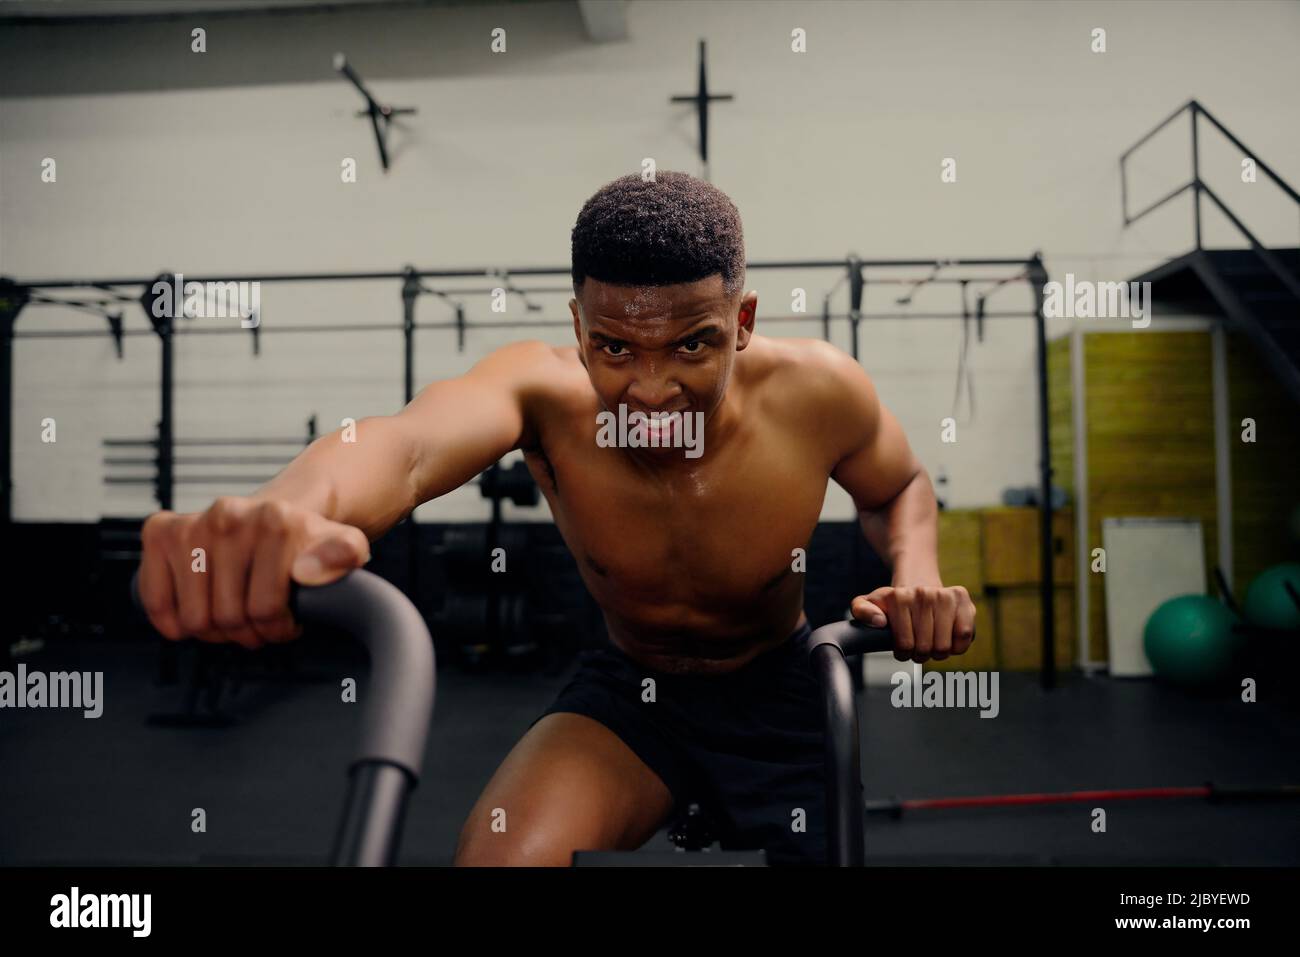 https://c8.alamy.com/comp/2JBYEWD/african-american-male-using-an-elliptical-trainer-during-cross-fit-training-male-athlete-exercising-intensely-in-the-gym-high-quality-photo-2JBYEWD.jpg